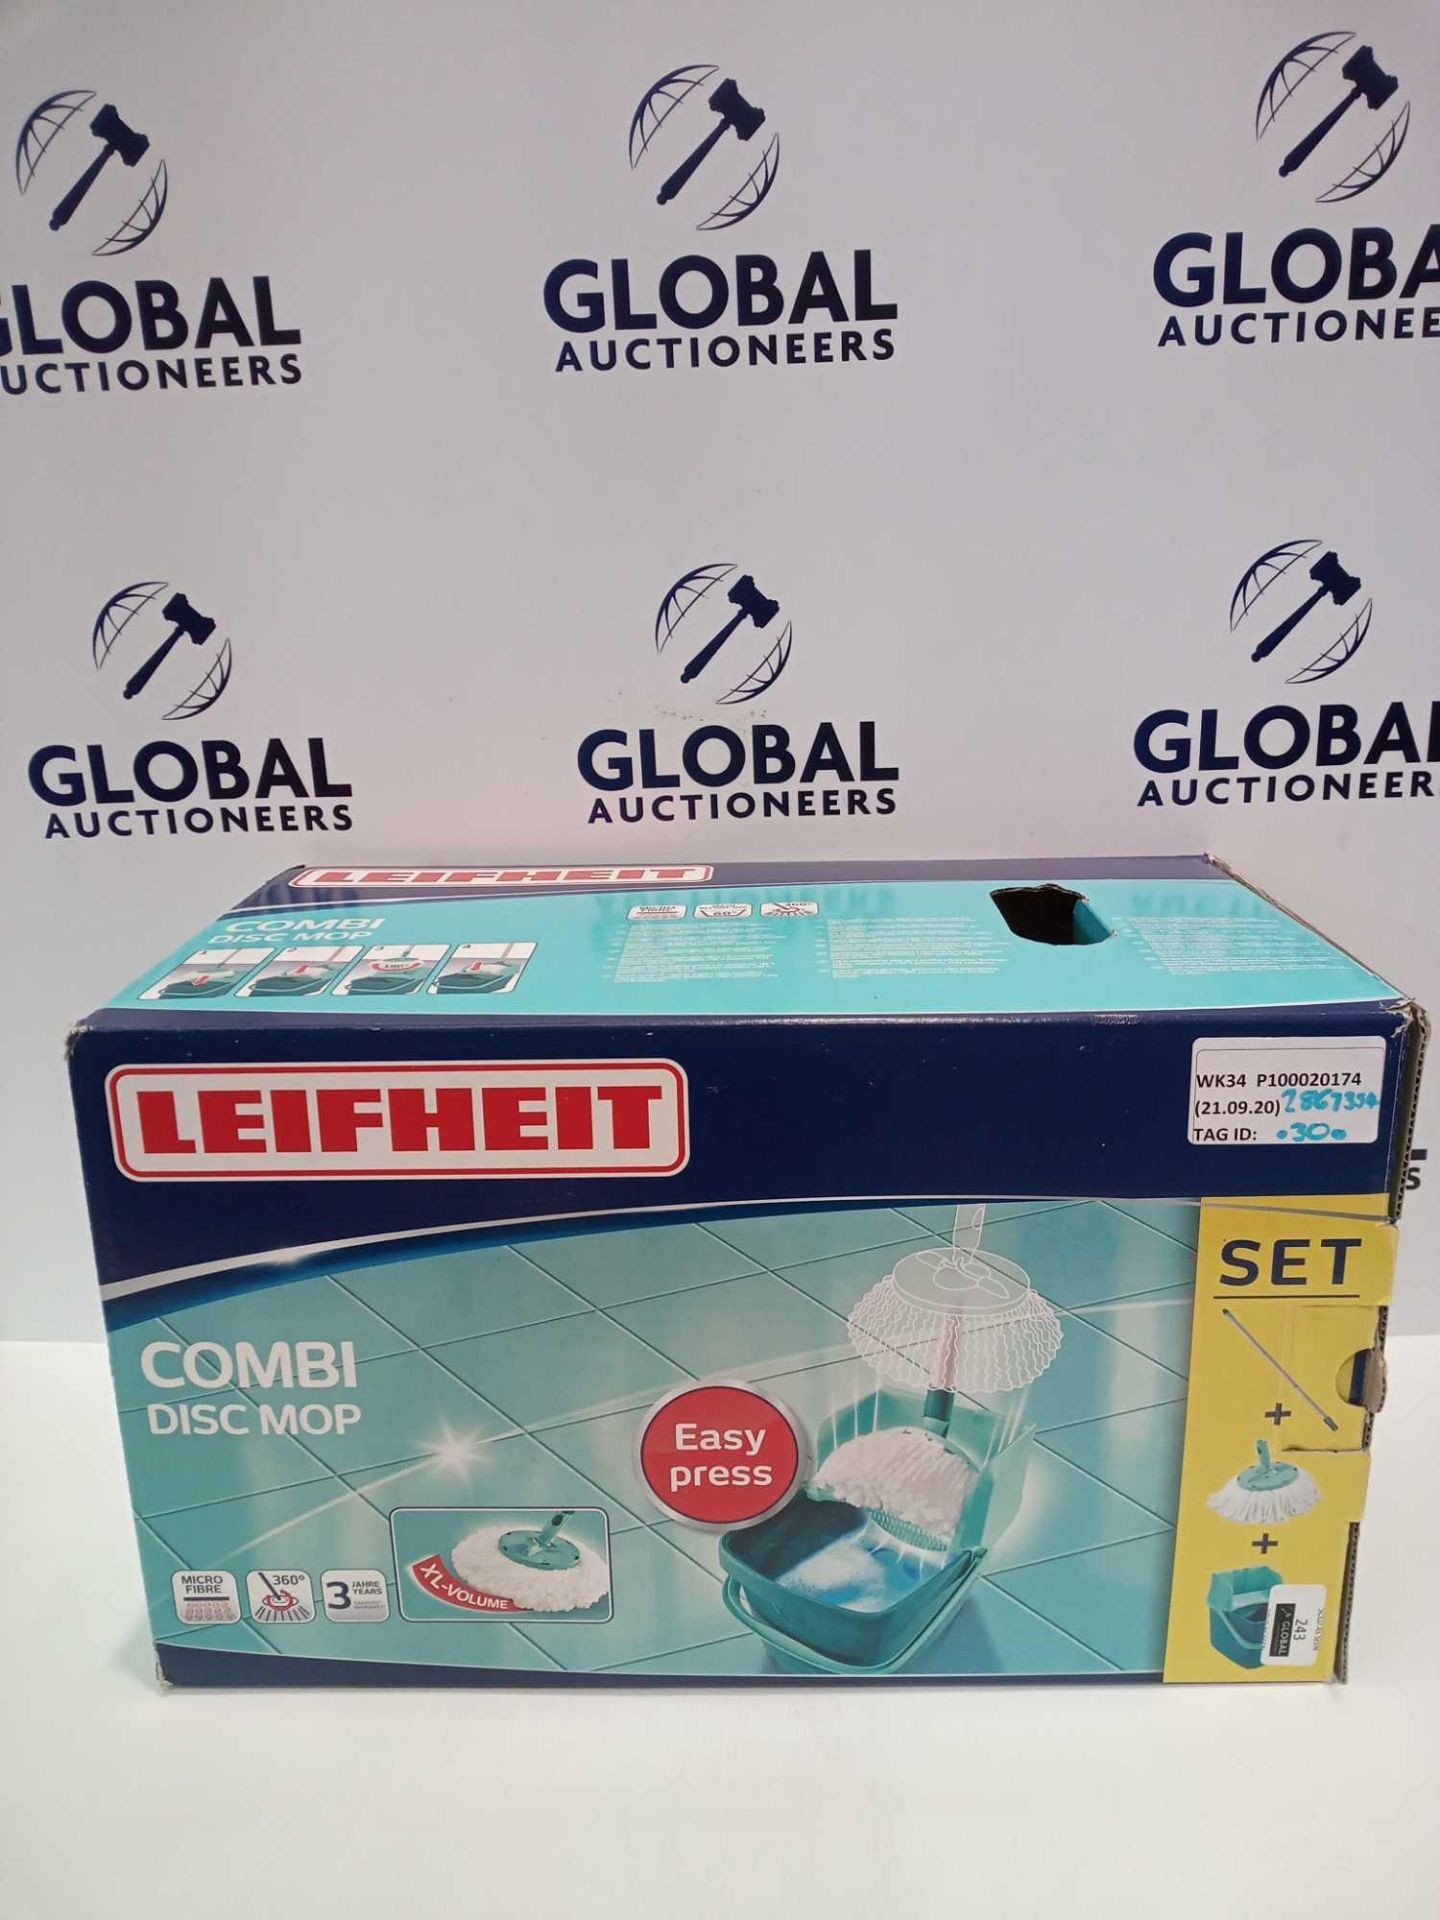 Rrp £40 Boxed Assorted Items To Include A Bialetti Oceans Moka Express Cafetiere And A Leifheit Comb